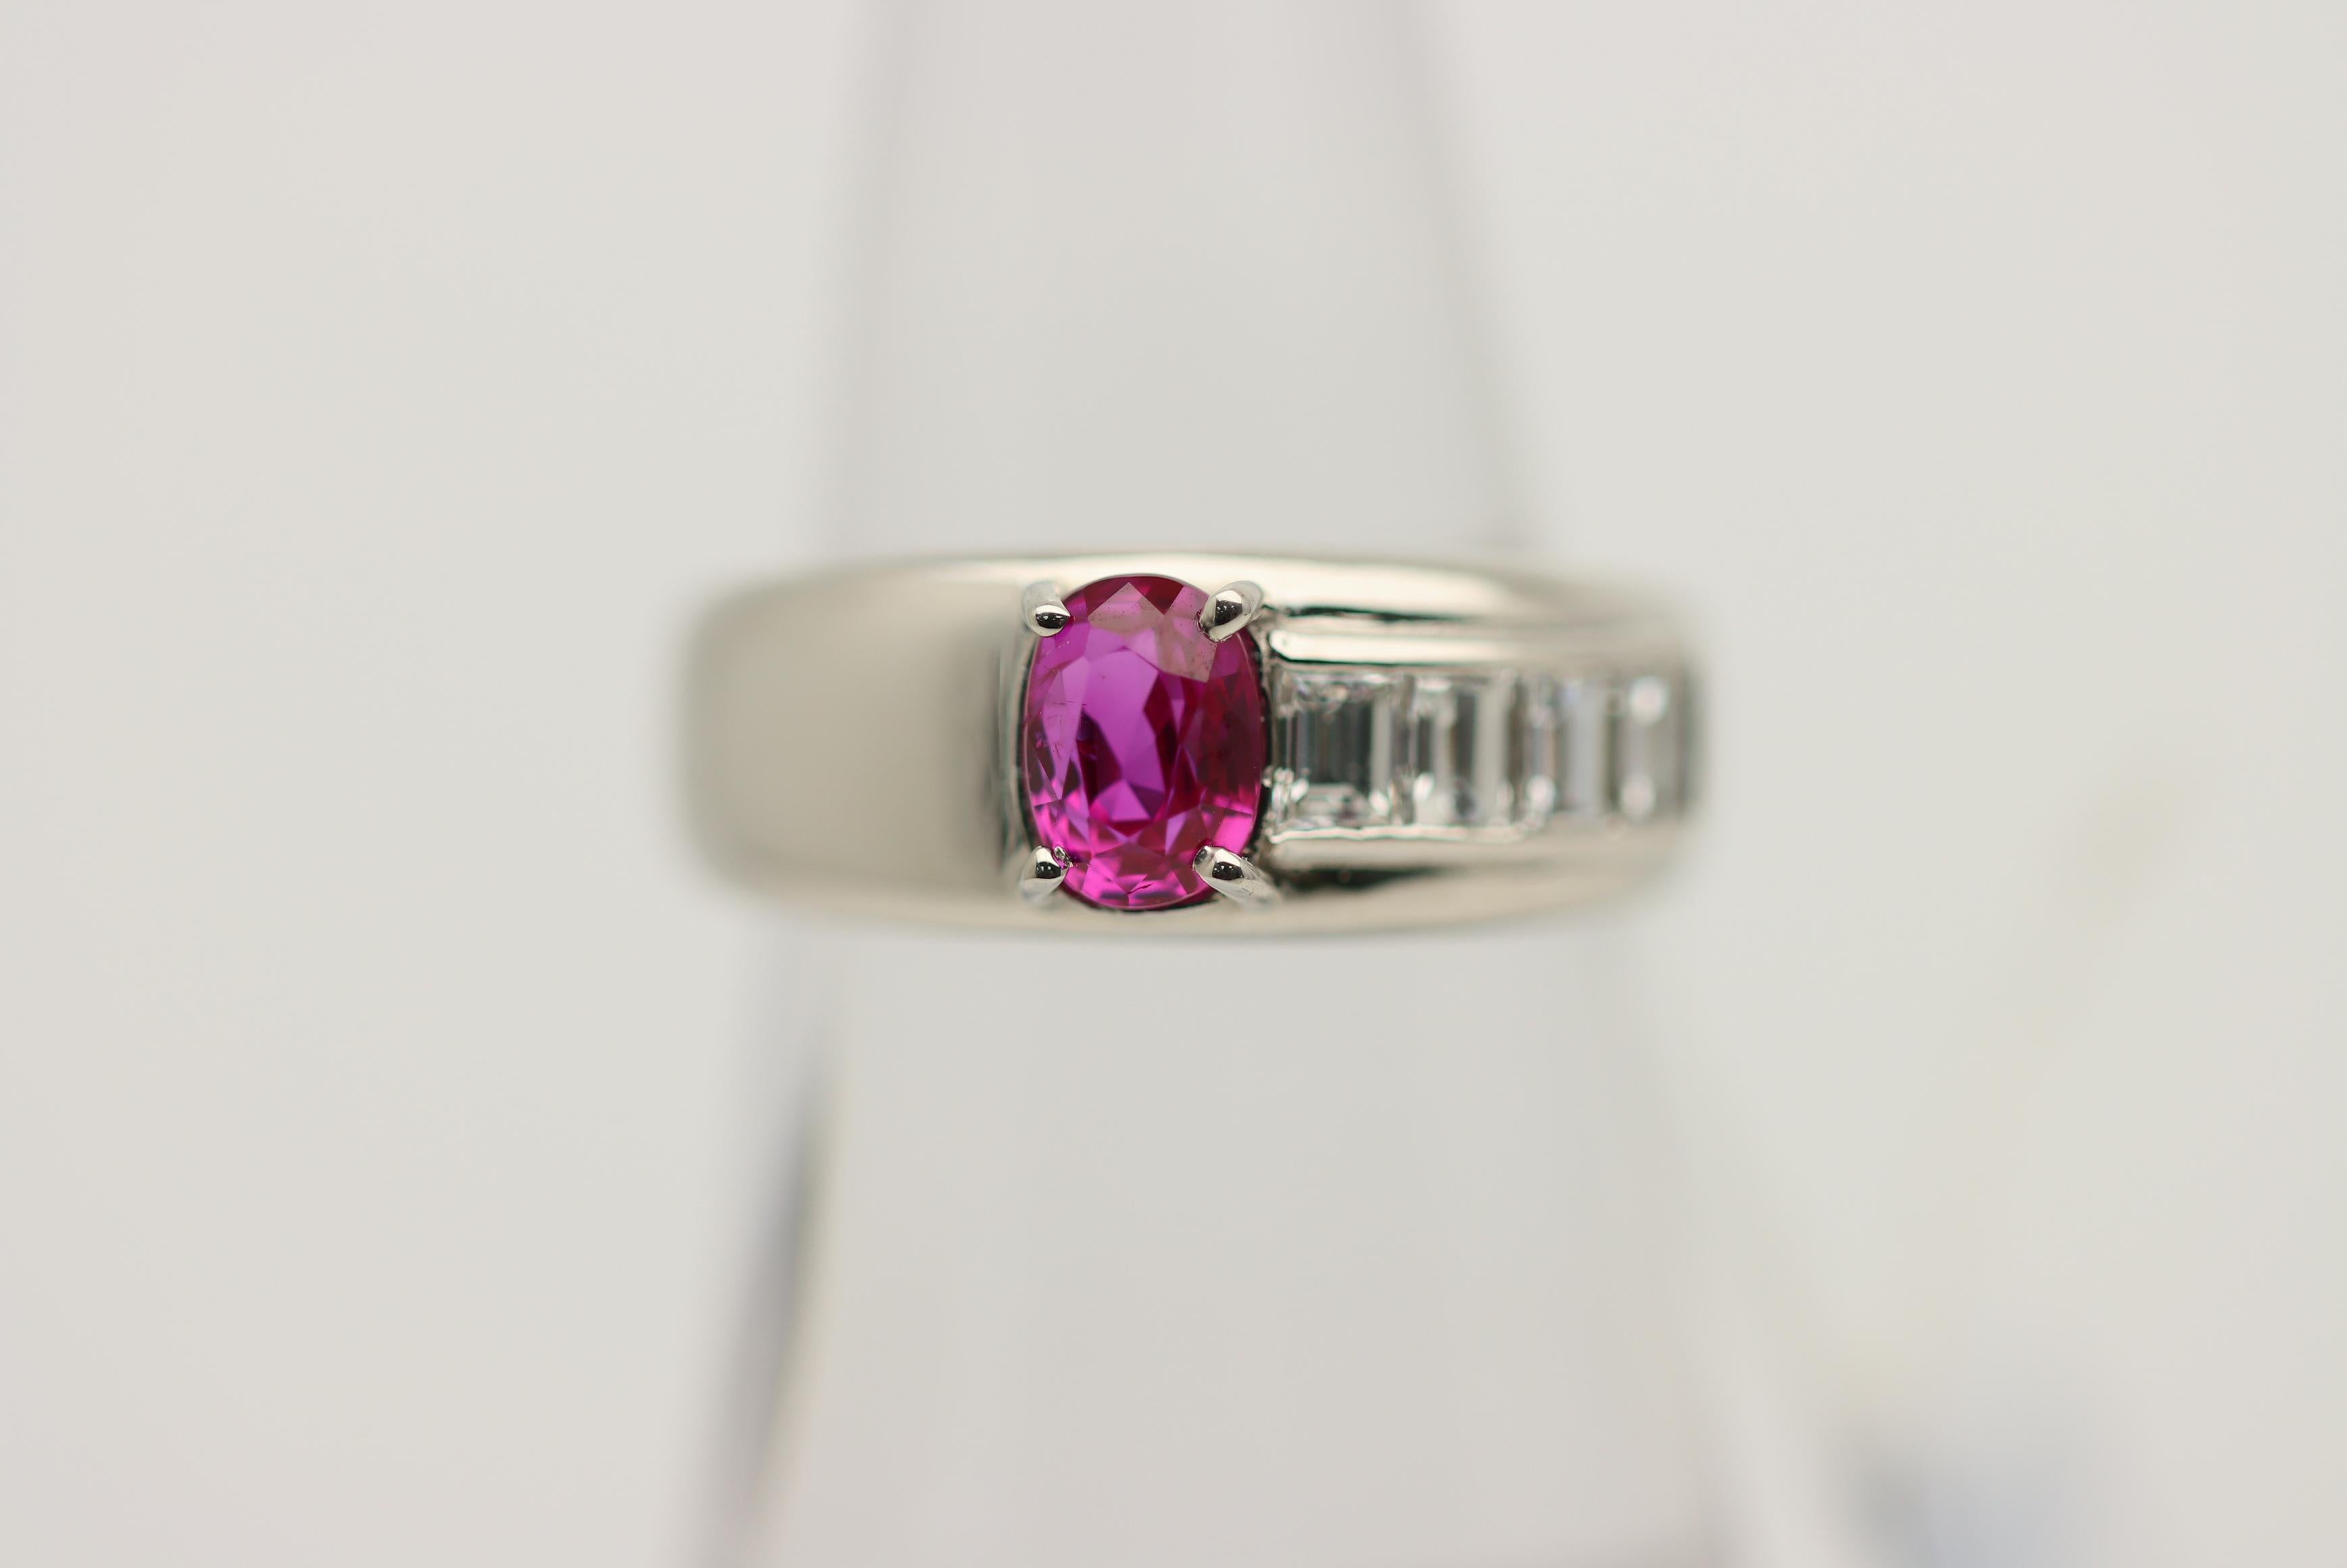 Here we have a finely made platinum ring featuring a GIA certified Burmese ruby. The ruby weighs 1.04 carats and has a bright and vibrant pinkish-red color which is classic for fine stones of this origin. It is complemented by 0.48 carats of bright